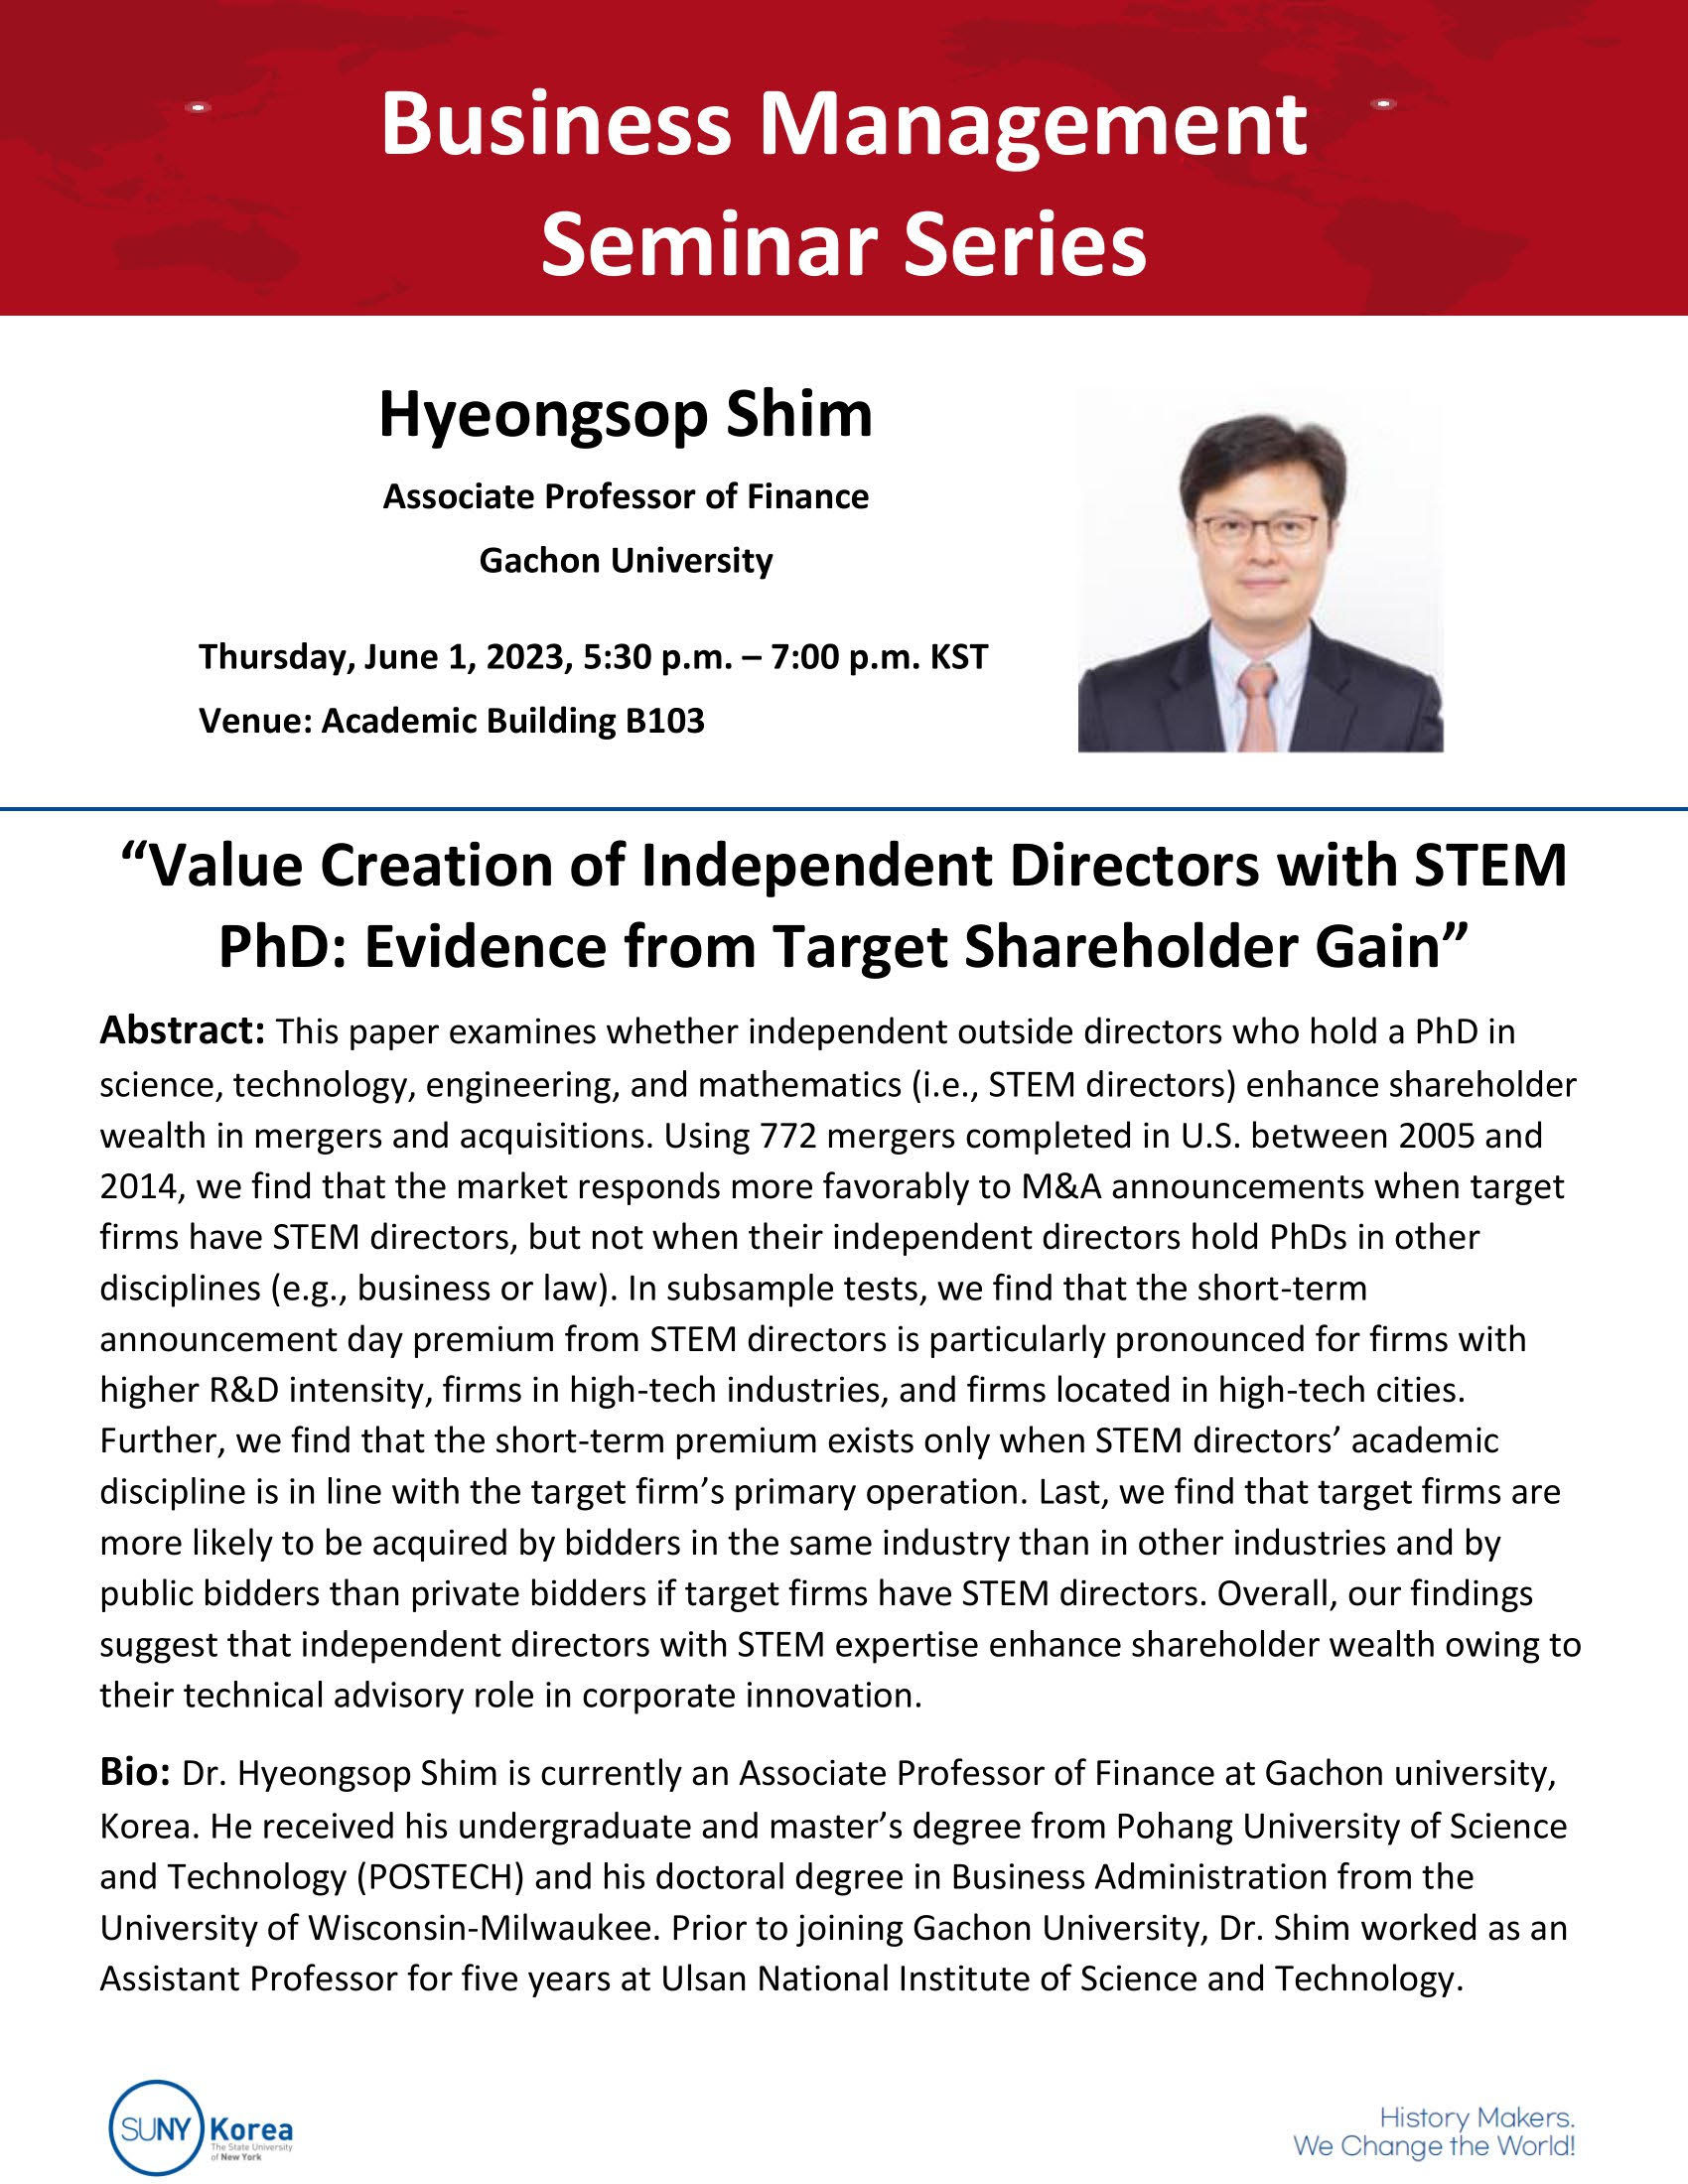 Business Management Seminar Series. Hyeongsop Shim Associate Professor of Finance Gachon University Thursday, June 1, 2023, 5:30p.m.-7:00p.m. KST Venue: Academic Building B103 [Value Creation of Independent Directors with STEM PhD: Evidence from Target Shareholder Gain] Abstract: This paper examines whether independent outside directors who hold a PhD in science, technology, engineering, and mathematics(i.e., STEM directors) enhance shareholder wealth in mergers and acquisitions. Using 772 mergers completed in U.S. between 2005 and 2014, we find that the market responds more favorably to M&A announcements when target firms have STEM directors, but not when their independent directors hold PhDs in other disciplines (e.g., business or law). In subsample tests, we find that the short-term announcement day premium from STEM directors is particularly pronounced for firms with higher R&D intensity, firms in high-tech industries, and firms located in high-tech cities. Further, we find that the short-term premium exists only when STEM directors' academic discipline is in line with the target firm's premium exists only when STEM directors' academic discipline is in line with the target firm's primary operation. Last, we find that target firms are more likely to be acquired by bidders in the same industry than in other industries and by public bidders than private bidders if target firms have STEM directors. Overall, our findings suggest that independent directors with STEM expertise enhance sharehoder wealth owing to their technical advisory role in corporate innovation. Bio: Dr. Hyeongsop Shim is currently an Associate Professor of Finance at Gachon university, Korea. He received his undergraduate and master's degree from Pohang University of Science and Technology(POSTECH) and his doctoral degree in Business Administration from the University of Wisconsin-Milwaukee. Prior to joining Gachon University, Dr. Shim worked as an Assiatant Professor for five years at Ulsan National Institute of Science and Technology. SUNY Korea. History Makers. We Change the World!